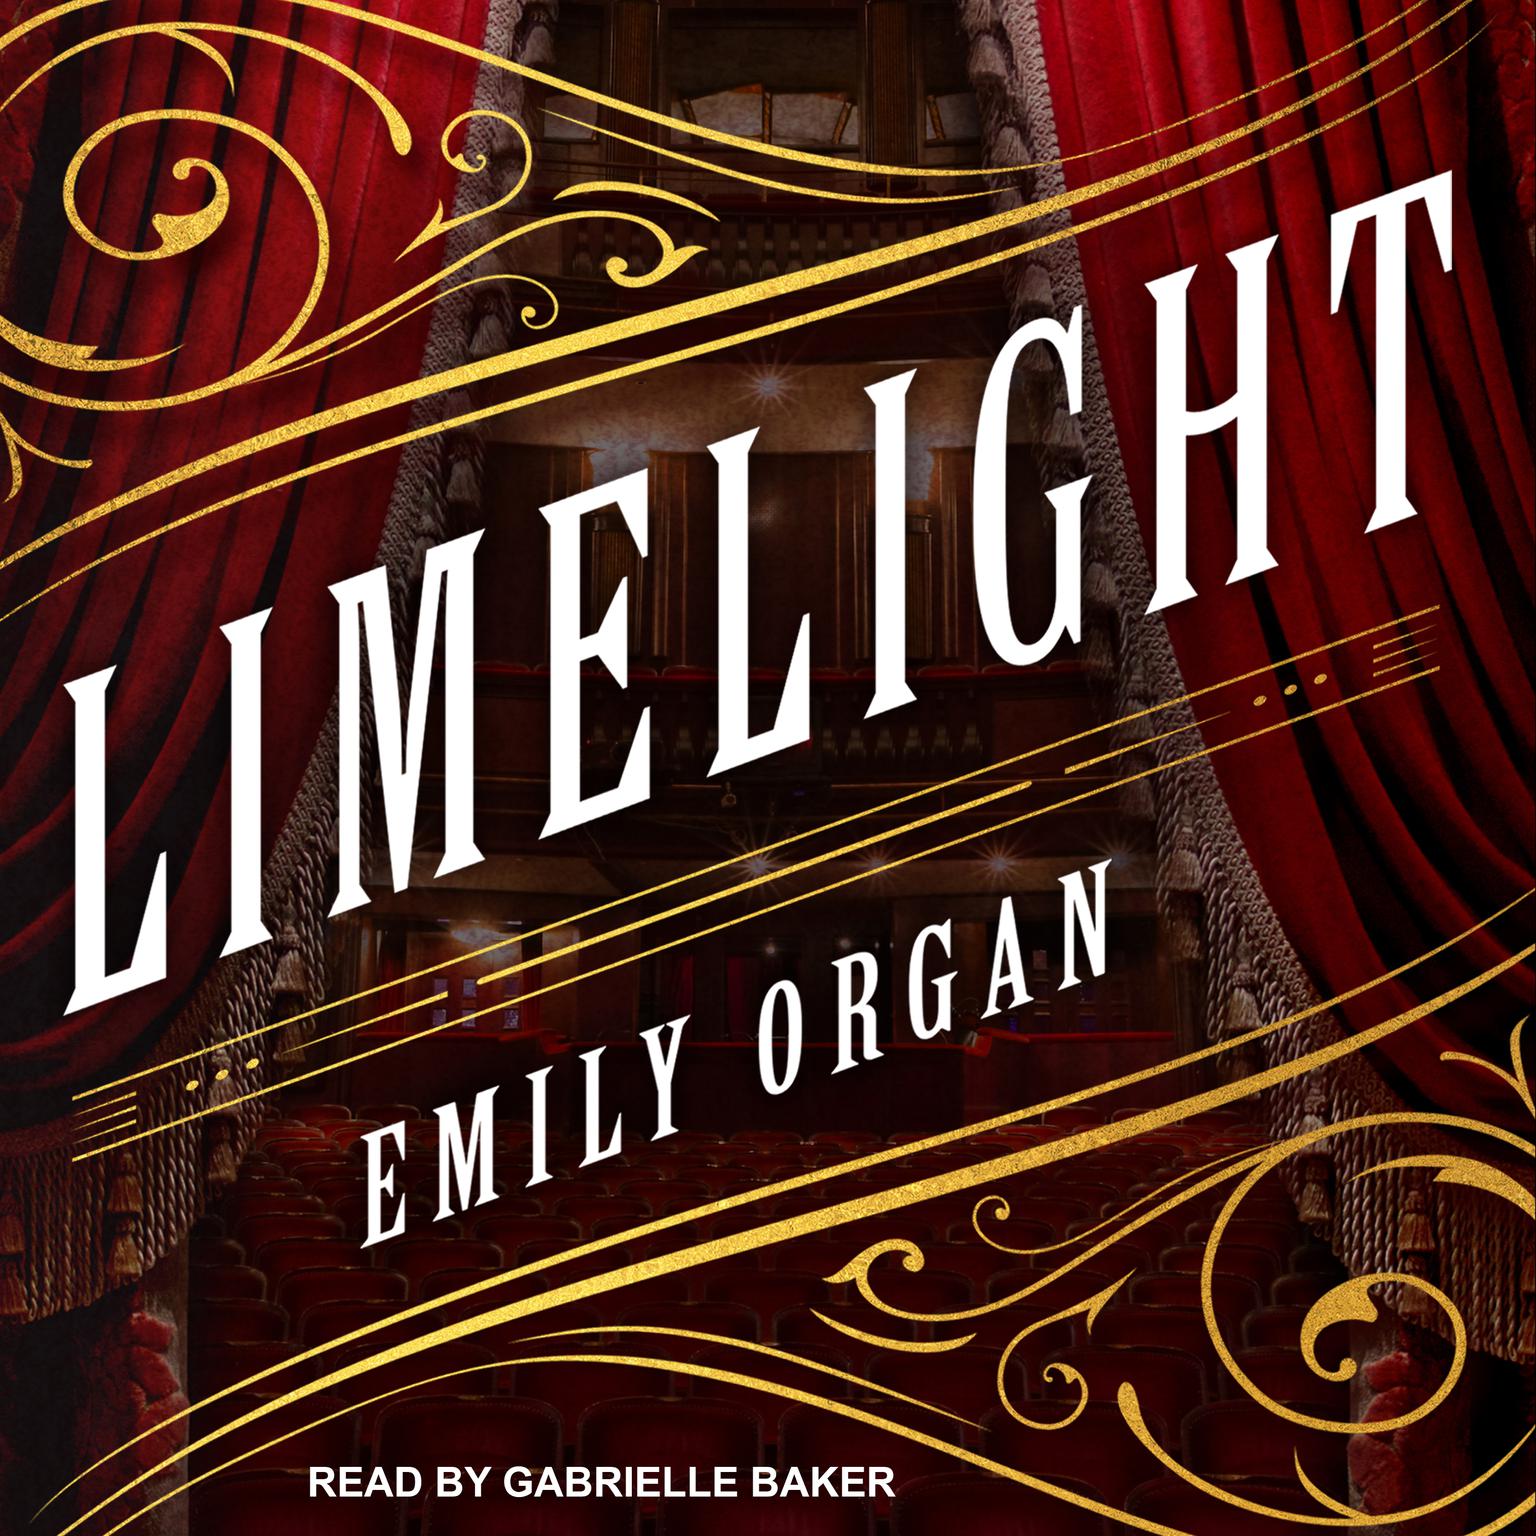 Limelight Audiobook, by Emily Organ